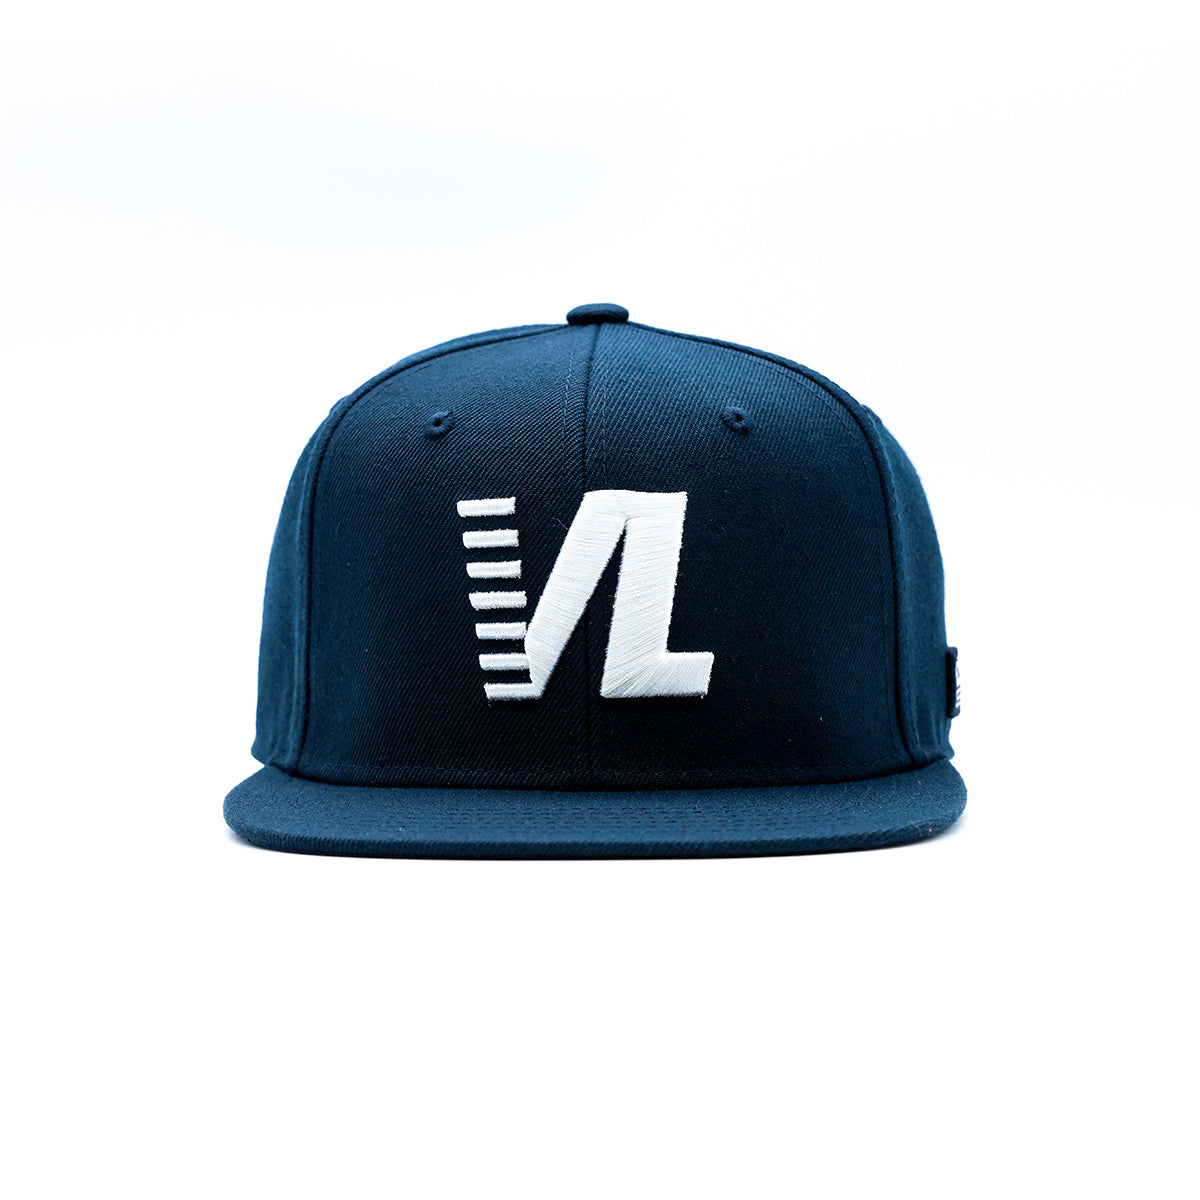 Victory Lap Limited Edition Snapback - Navy/White - Front